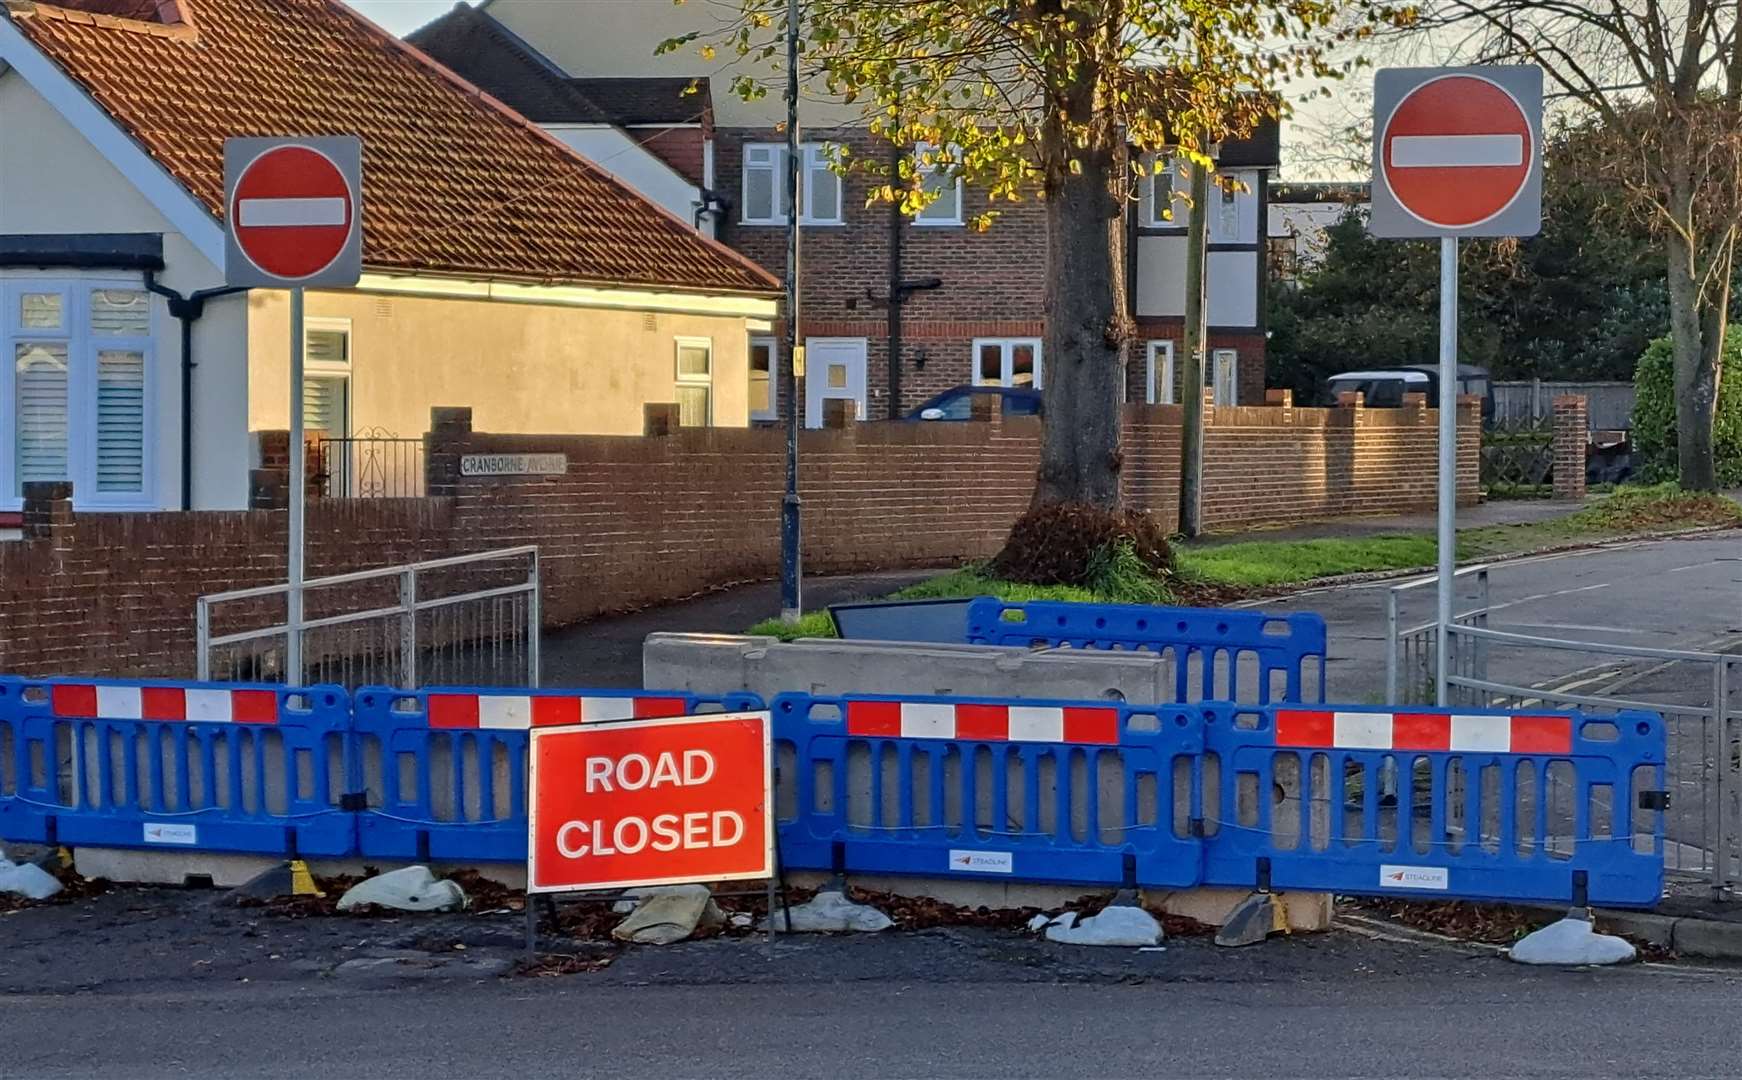 Cranborne Avenue has been closed for nearly 18 months